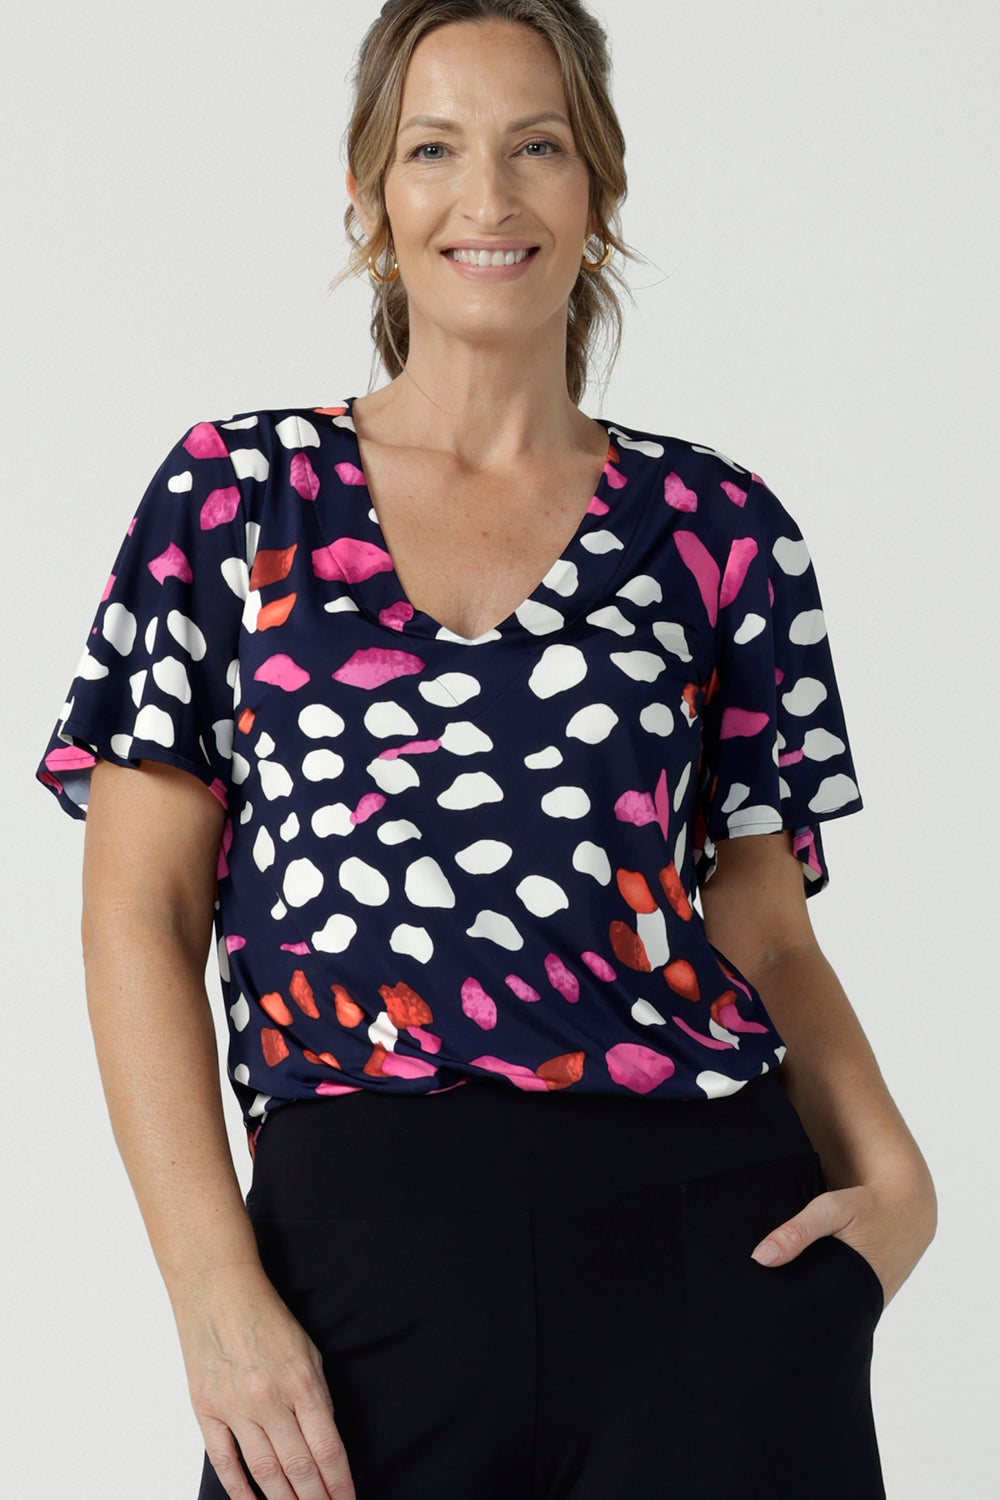 A size 10, 40 plus woman wears an abstract print jersey, V-neck top with flutter sleeves. A good top for summer casual wear, or style tucked as a workwear top. Shop made in Australia tops in petite to plus sizes online at Australian fashion brand, Leina & Fleur.